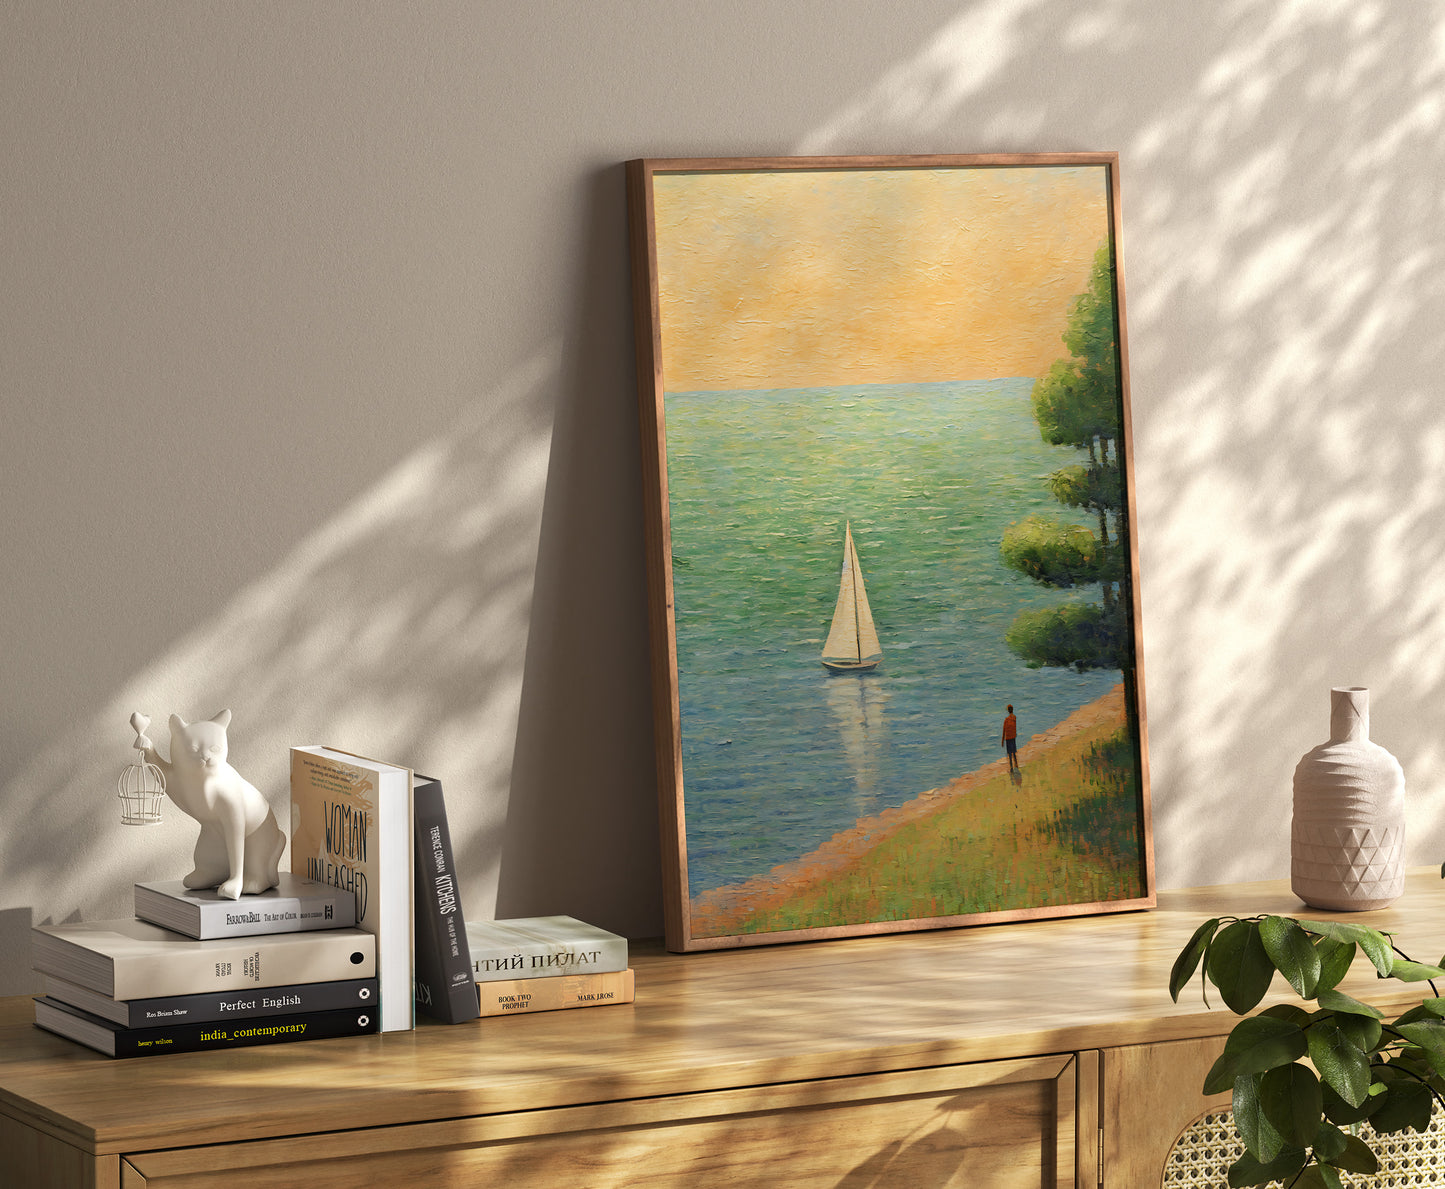 A tranquil painting of a sailboat on water beside books on a wooden cabinet in a sunlit room.